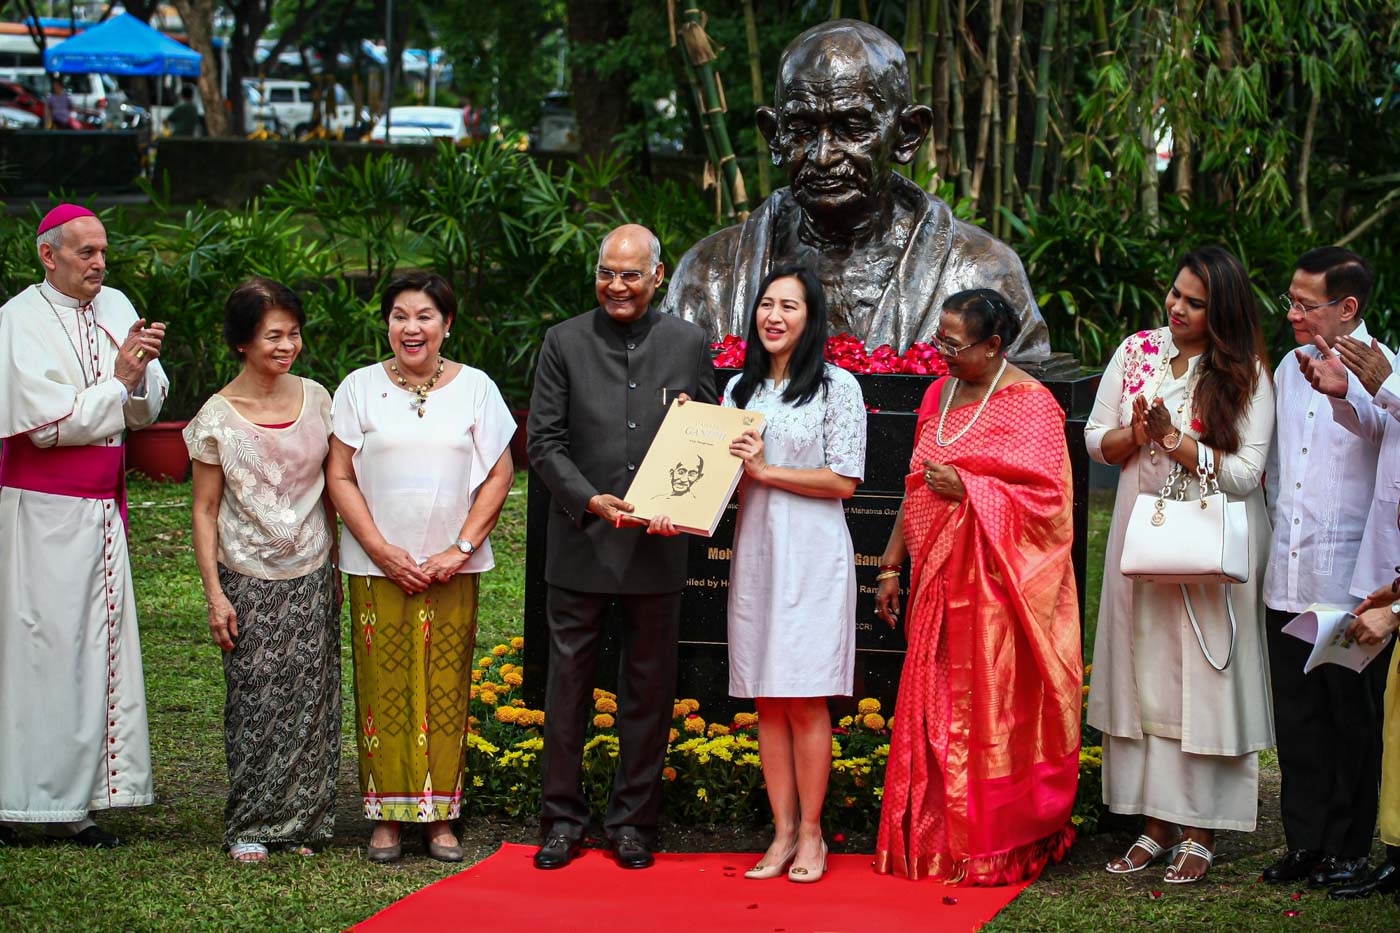 BOOK TURNOVER. Indian President Ram Nath Kovind hands to Quezon City mayor Joy Belmonte a book on Mahatma Gandhi, the revered political icon, following the unveiling of his bust at the Miriam College in Quezon City. Photo by Jire Carreon/Rappler 